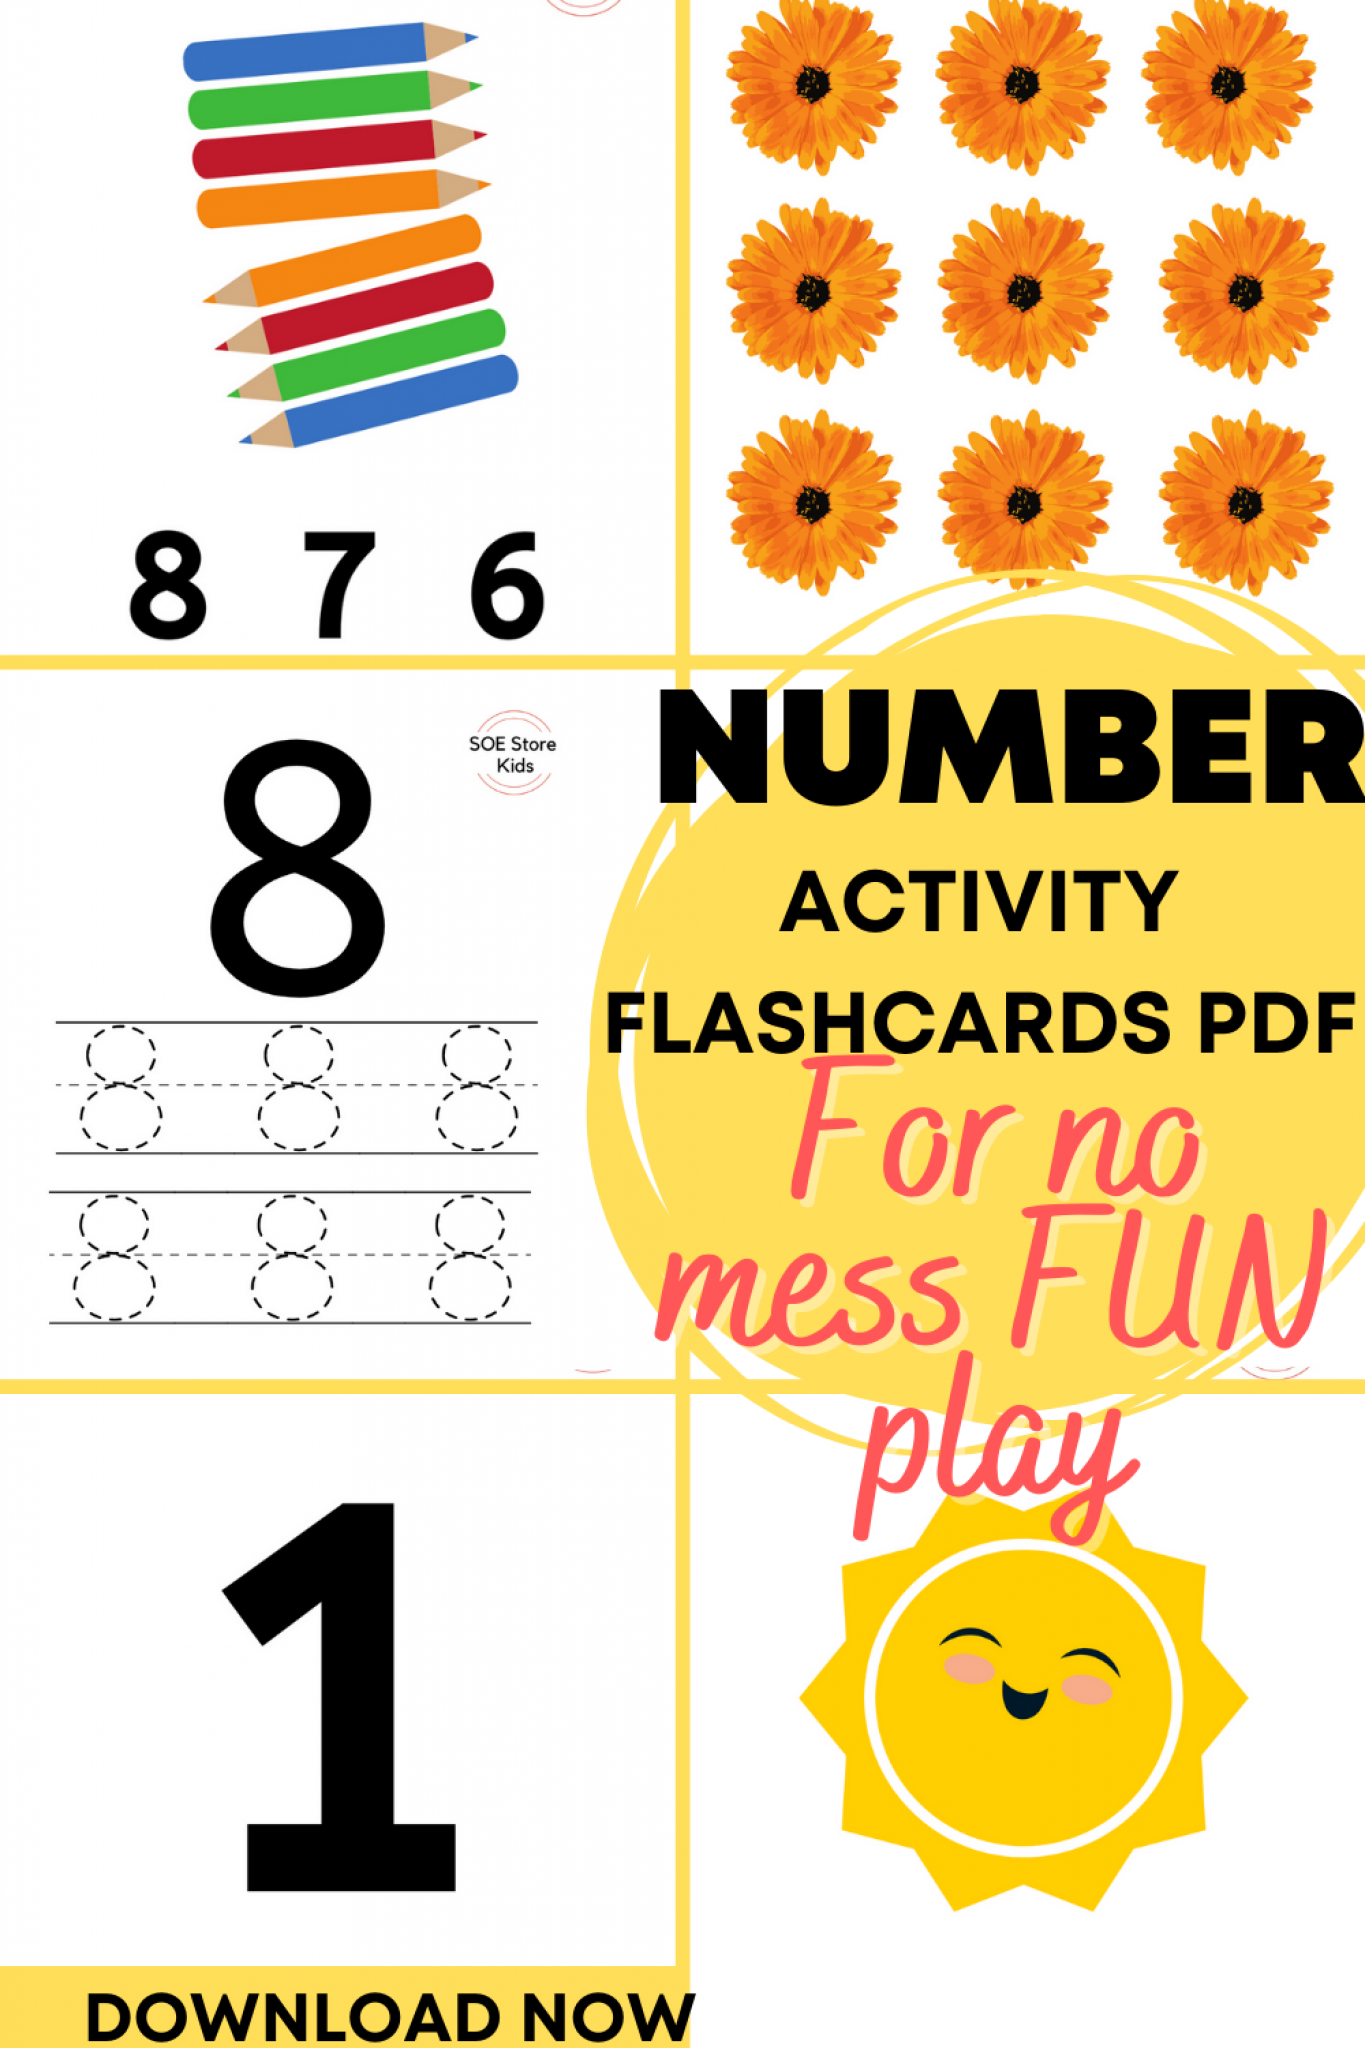 quick-and-easy-flashcards-activities-with-toddlers-fun-ways-to-use-flashcards-at-home